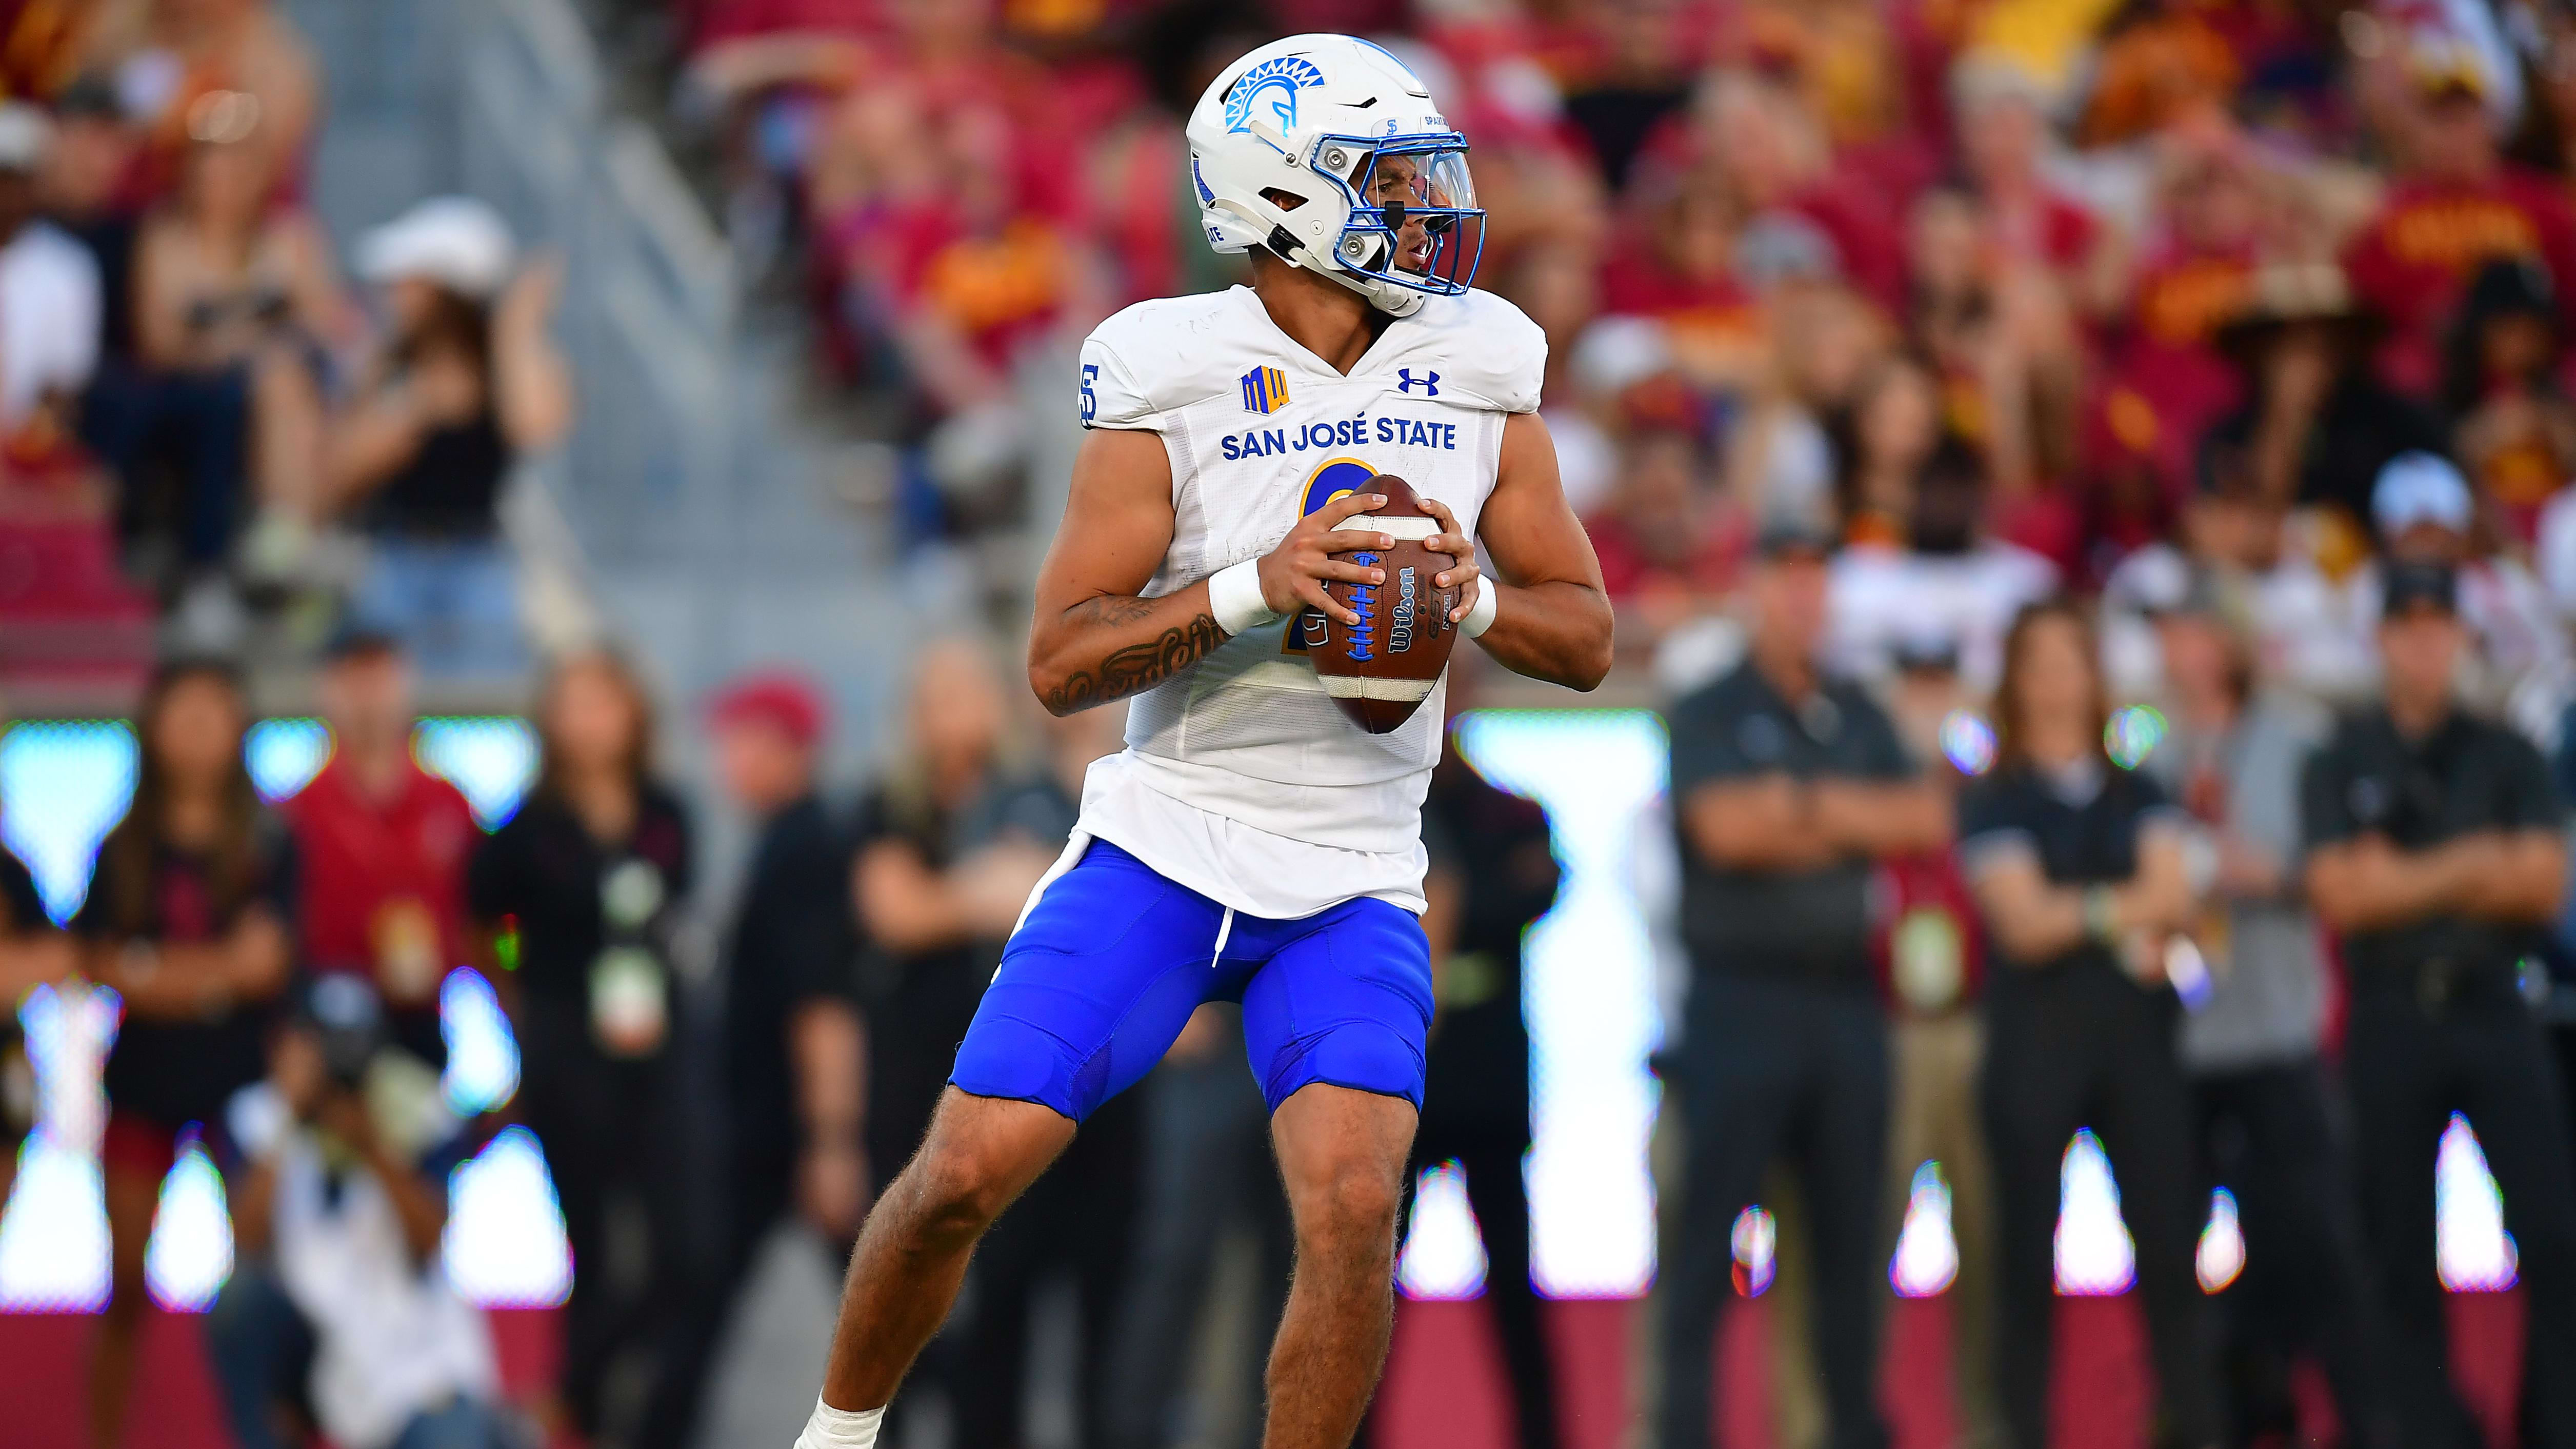 Former San José State & Hawaii Quarterback Signs With Seattle Seahawks